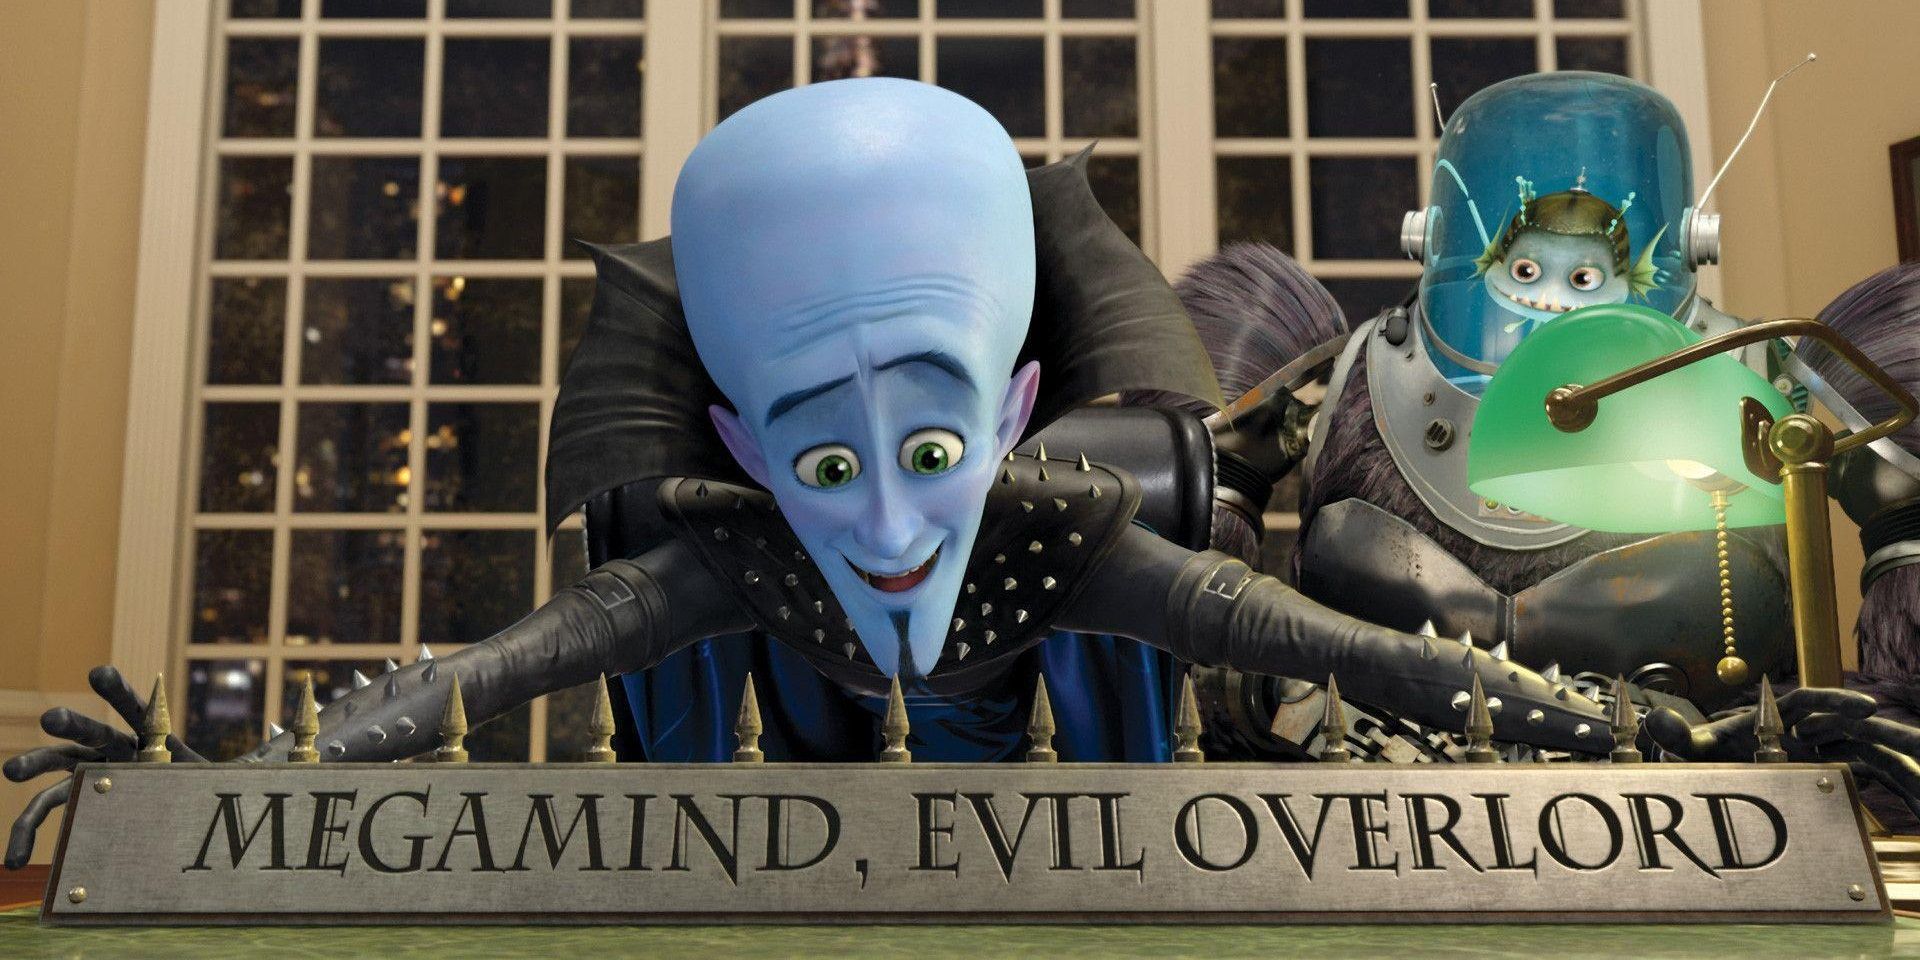 Megamind giving a speech and smiling